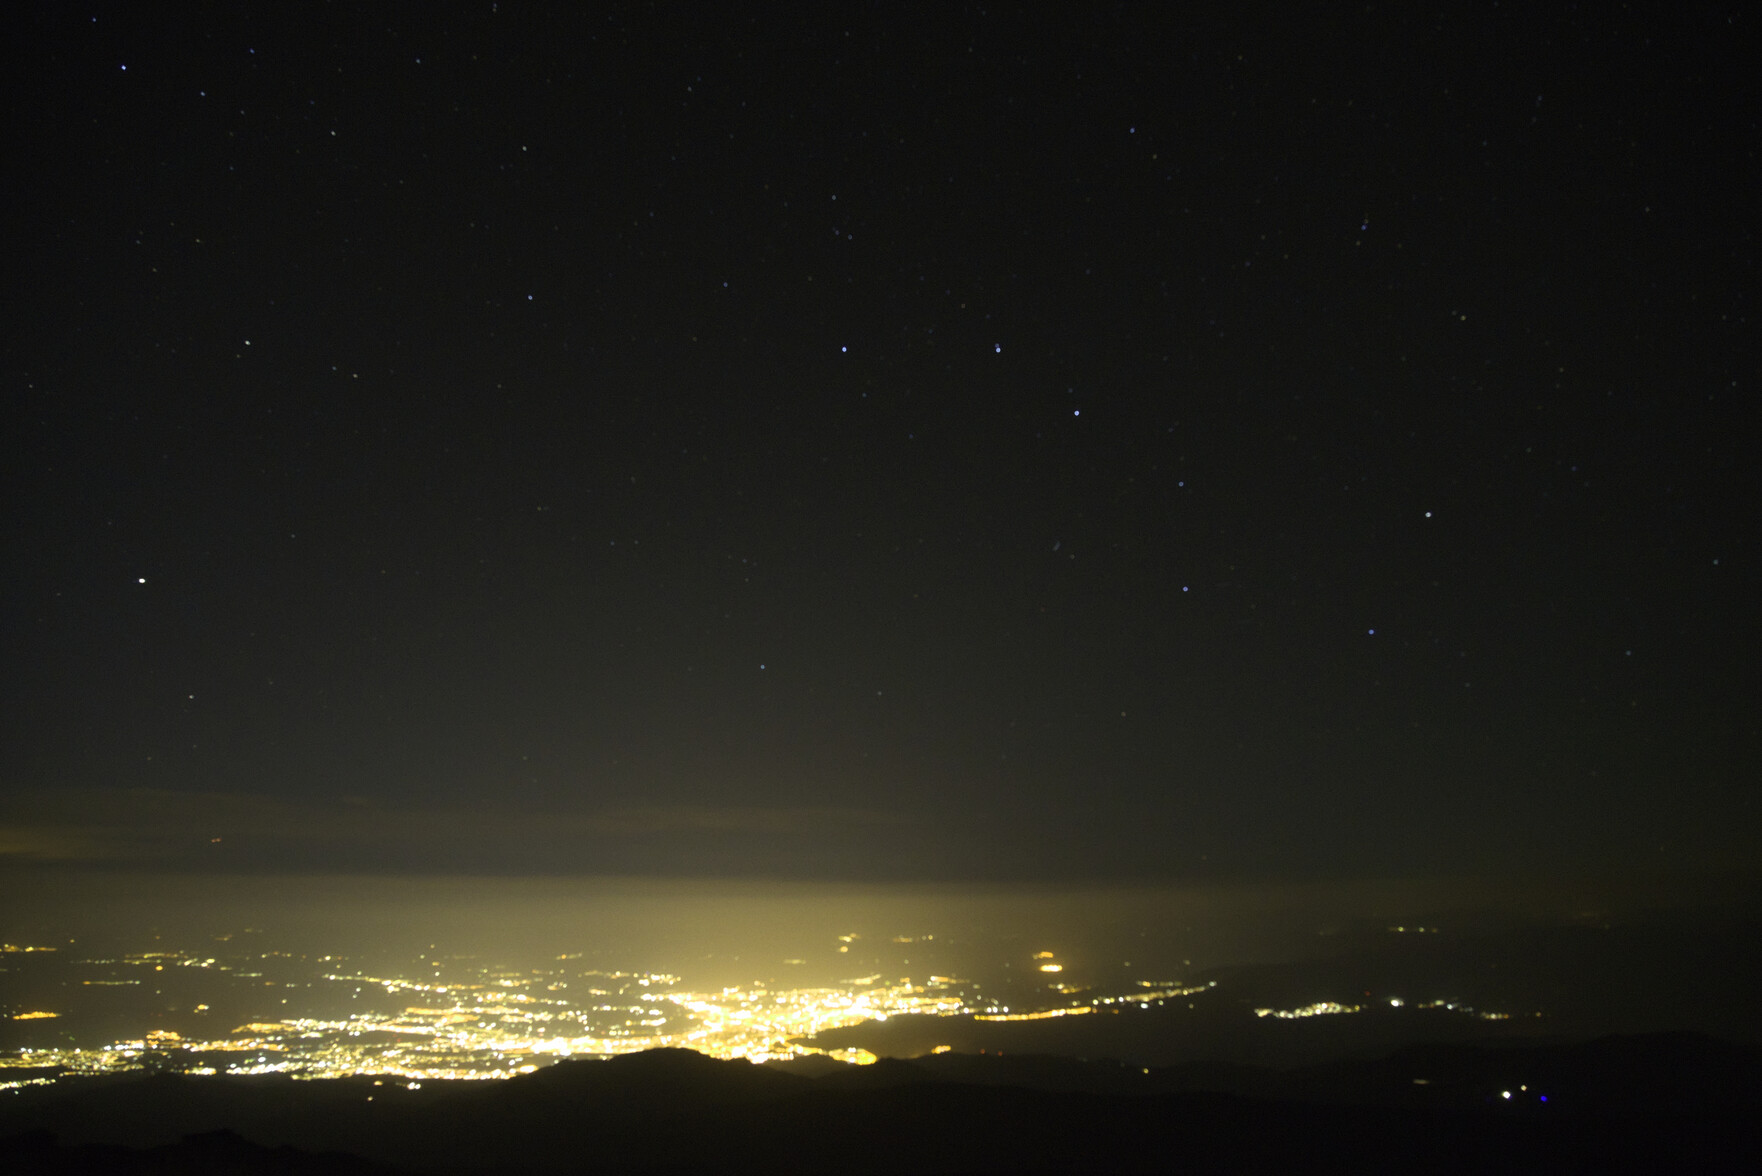 The lights from the city of Granada, Spain are at the bottom of the image. Above, clear skies and stars